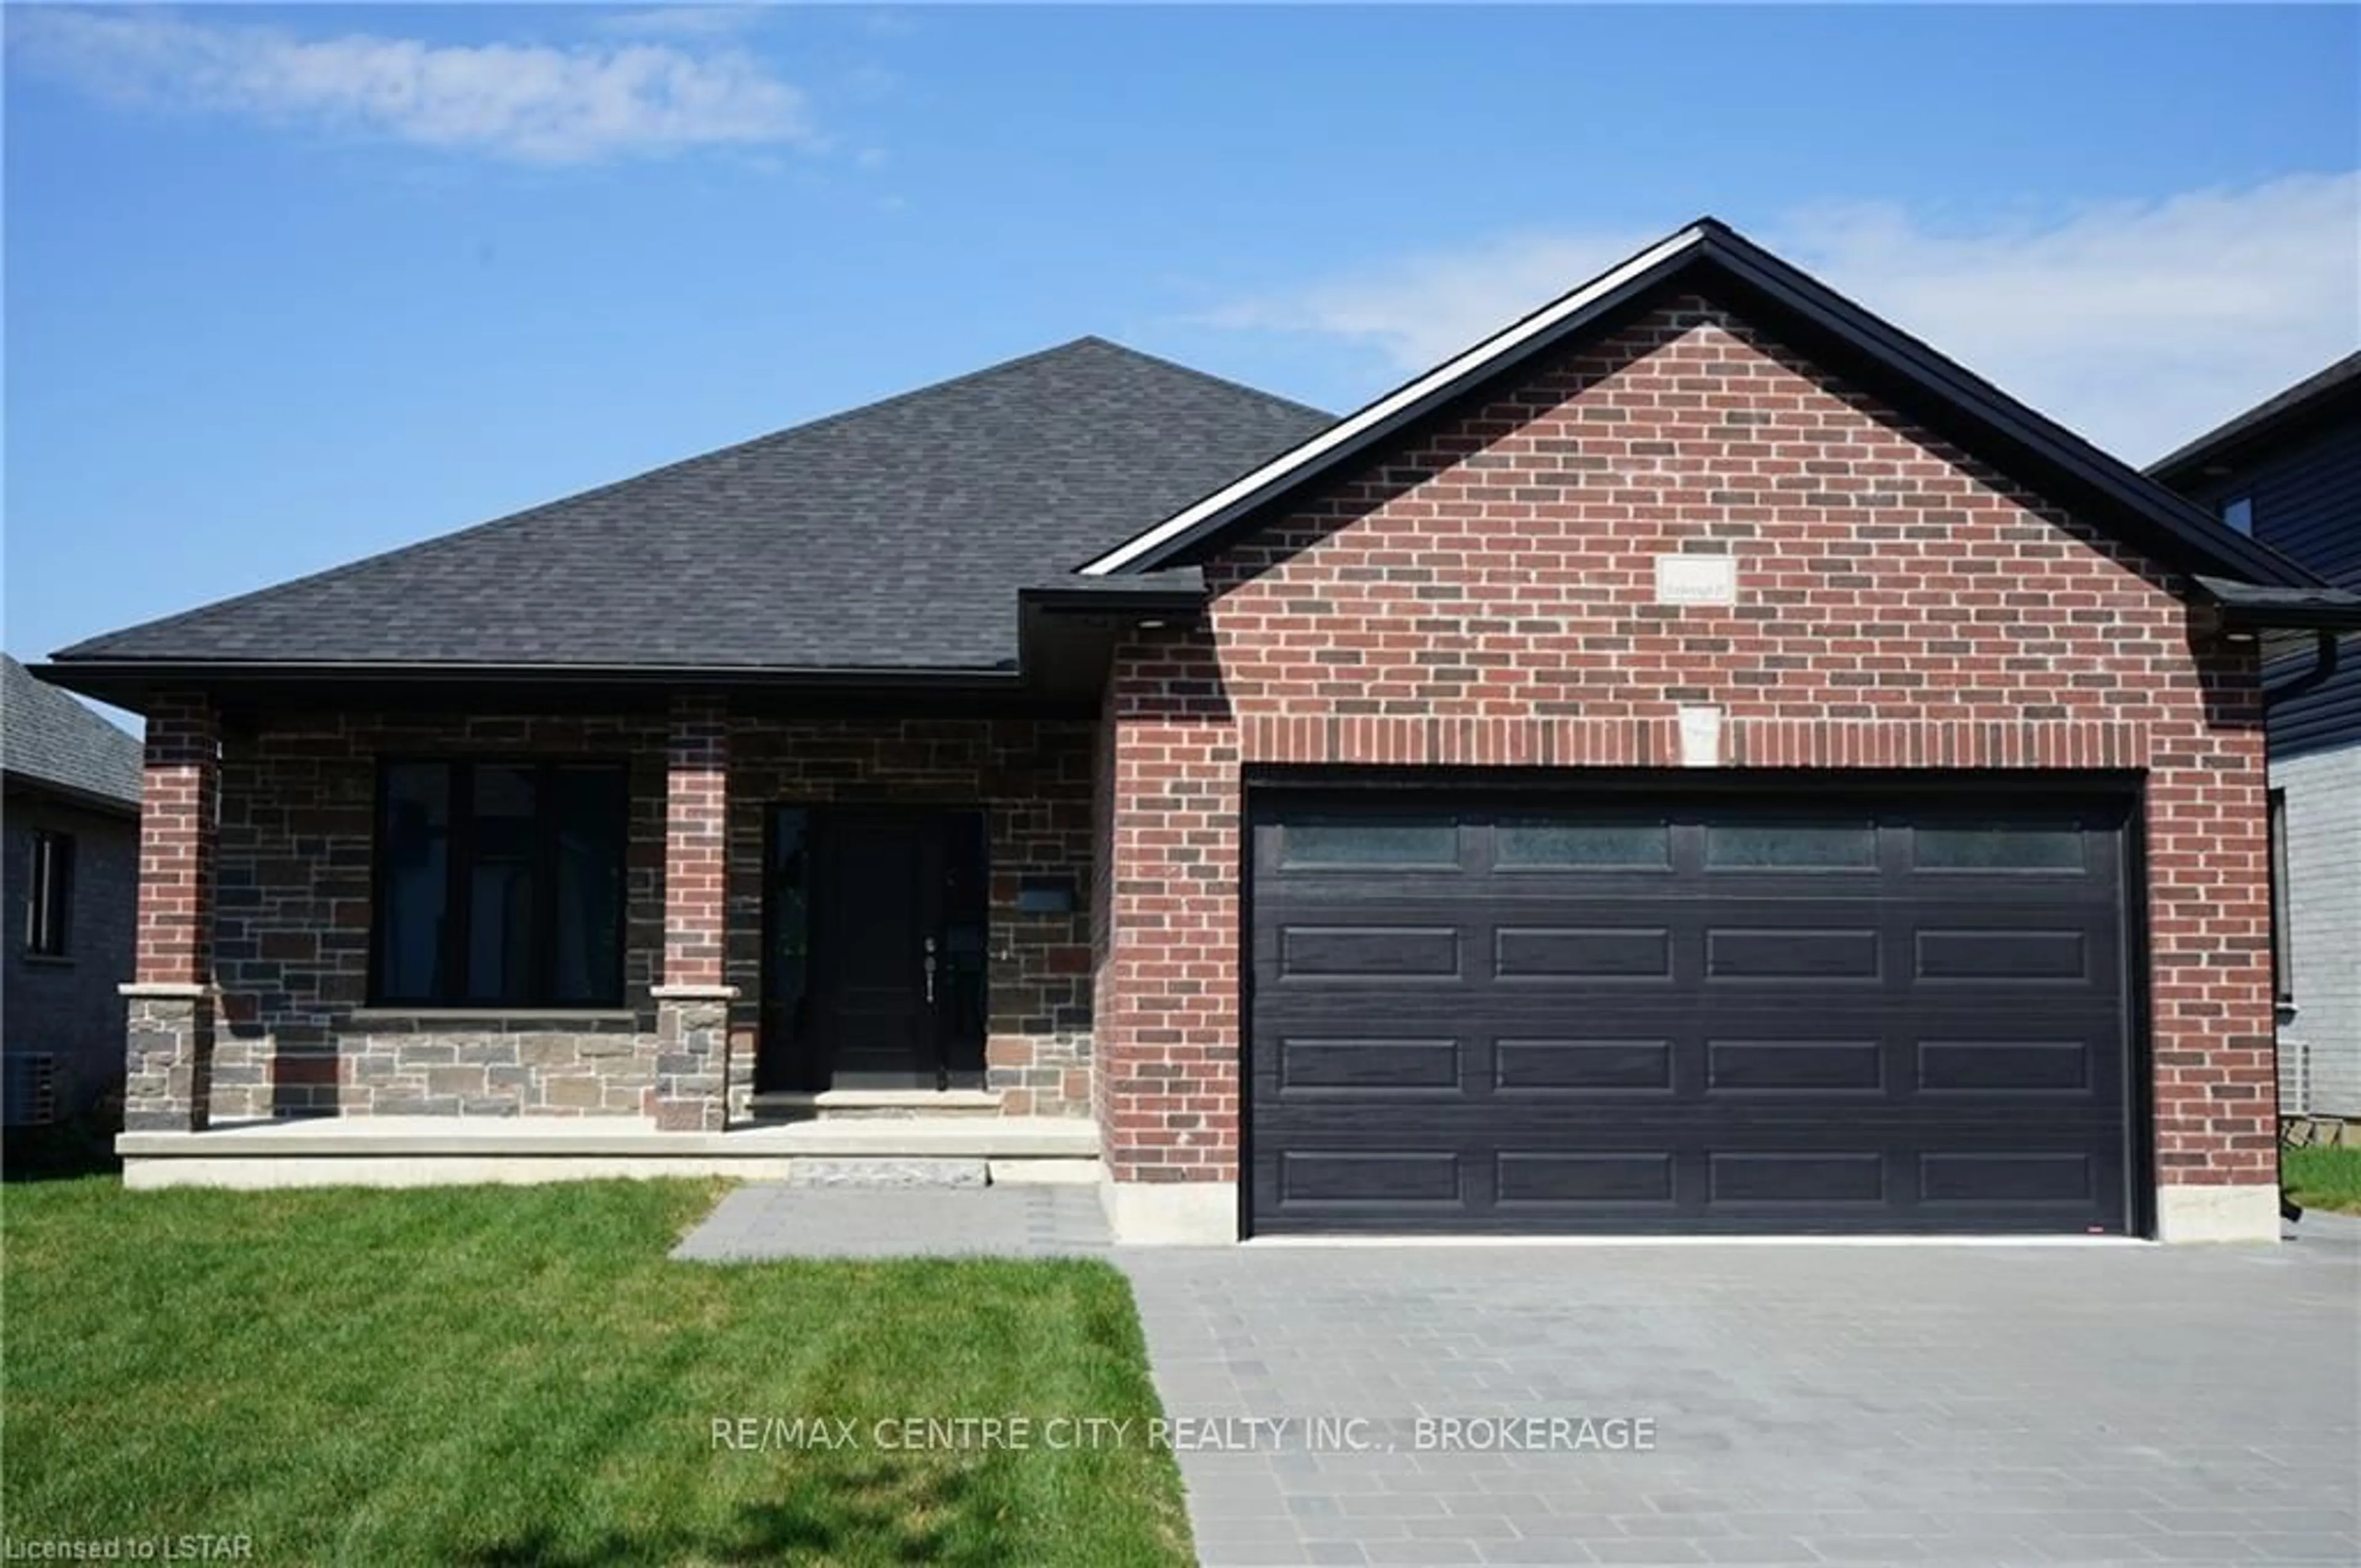 Home with brick exterior material for 199 Foxborough Pl, Thames Centre Ontario N0M 2P0